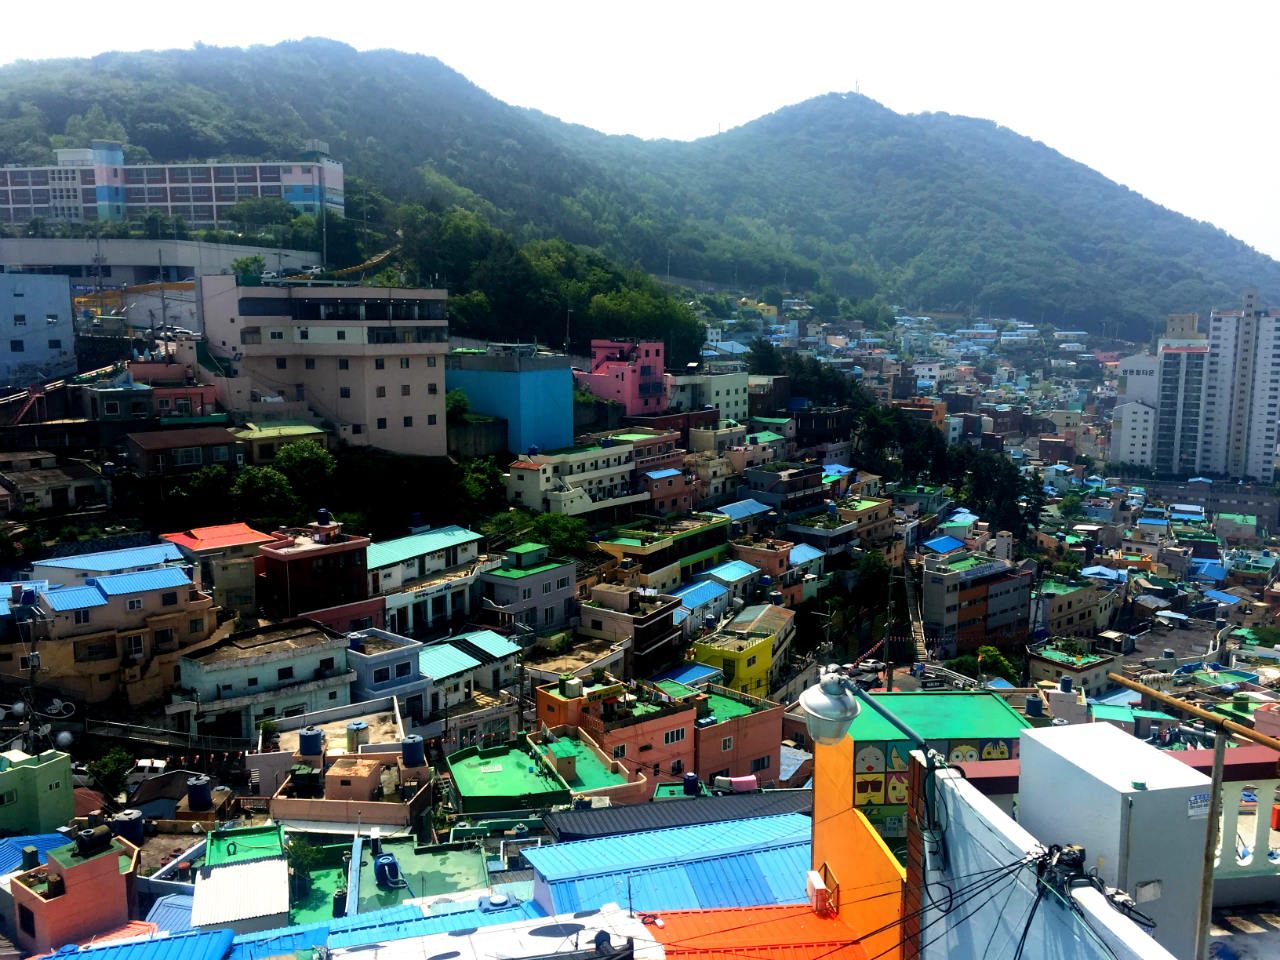 PHOTO ZONE. Gamcheon Culture Village offers numerous views of the village in strategically located photozones. Get ready to climb uphill! 